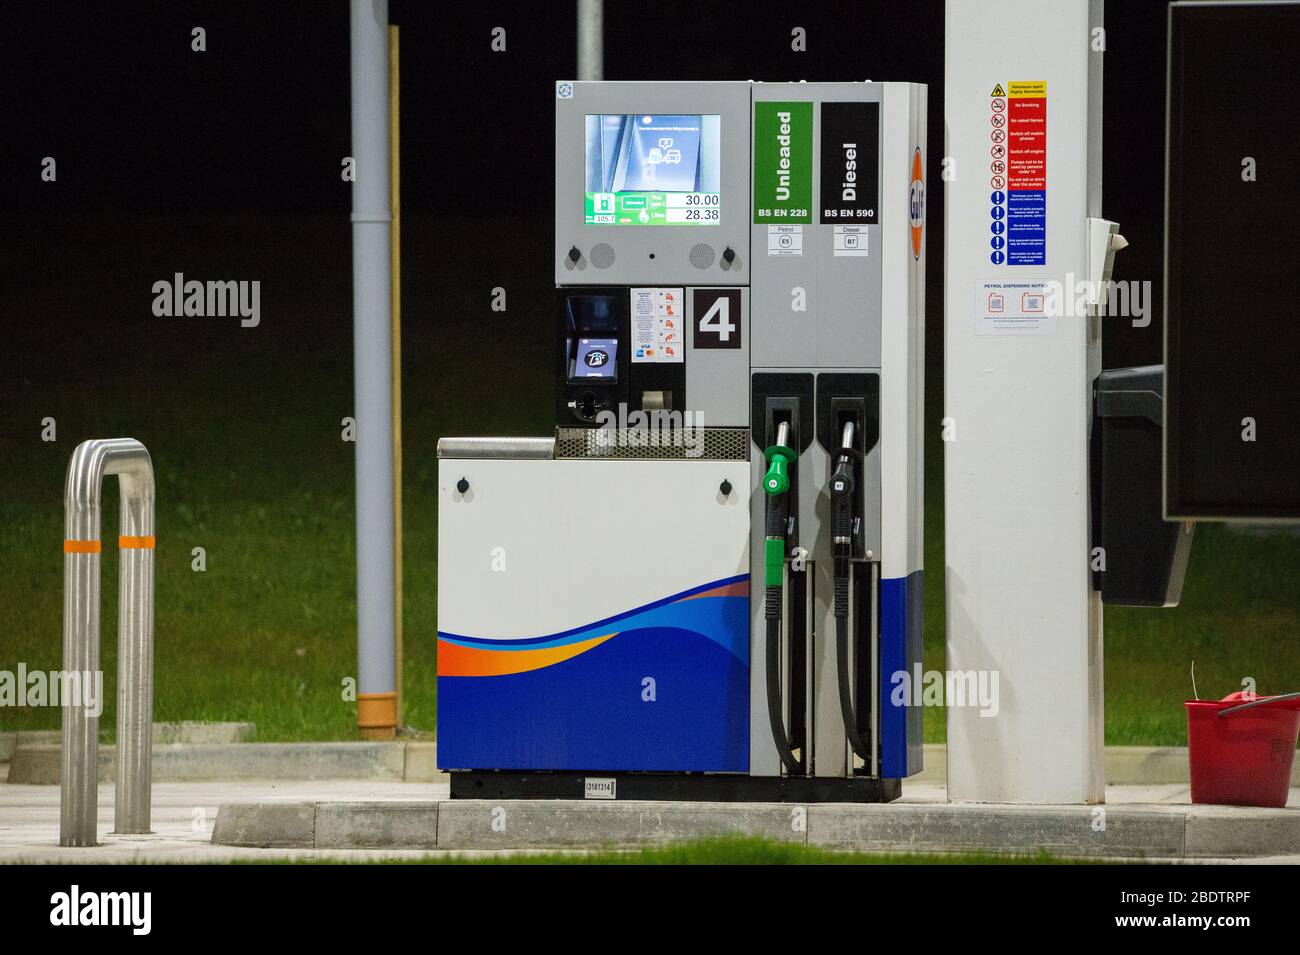 Cumbernauld, UK. 10th Apr, 2020. Pictured: Gulf filling station: Unleaded 105.7 pence/litre Disel 112.7 pence/litre UK Petrol pump prices have plummeted almost £1.00 per litre due to the the Coronavirus (COVID-19) crisis lockdown which has forced people to stay at home. In March 2020 the price oil fell below US$25 per barrel. Credit: Colin Fisher/Alamy Live News Stock Photo